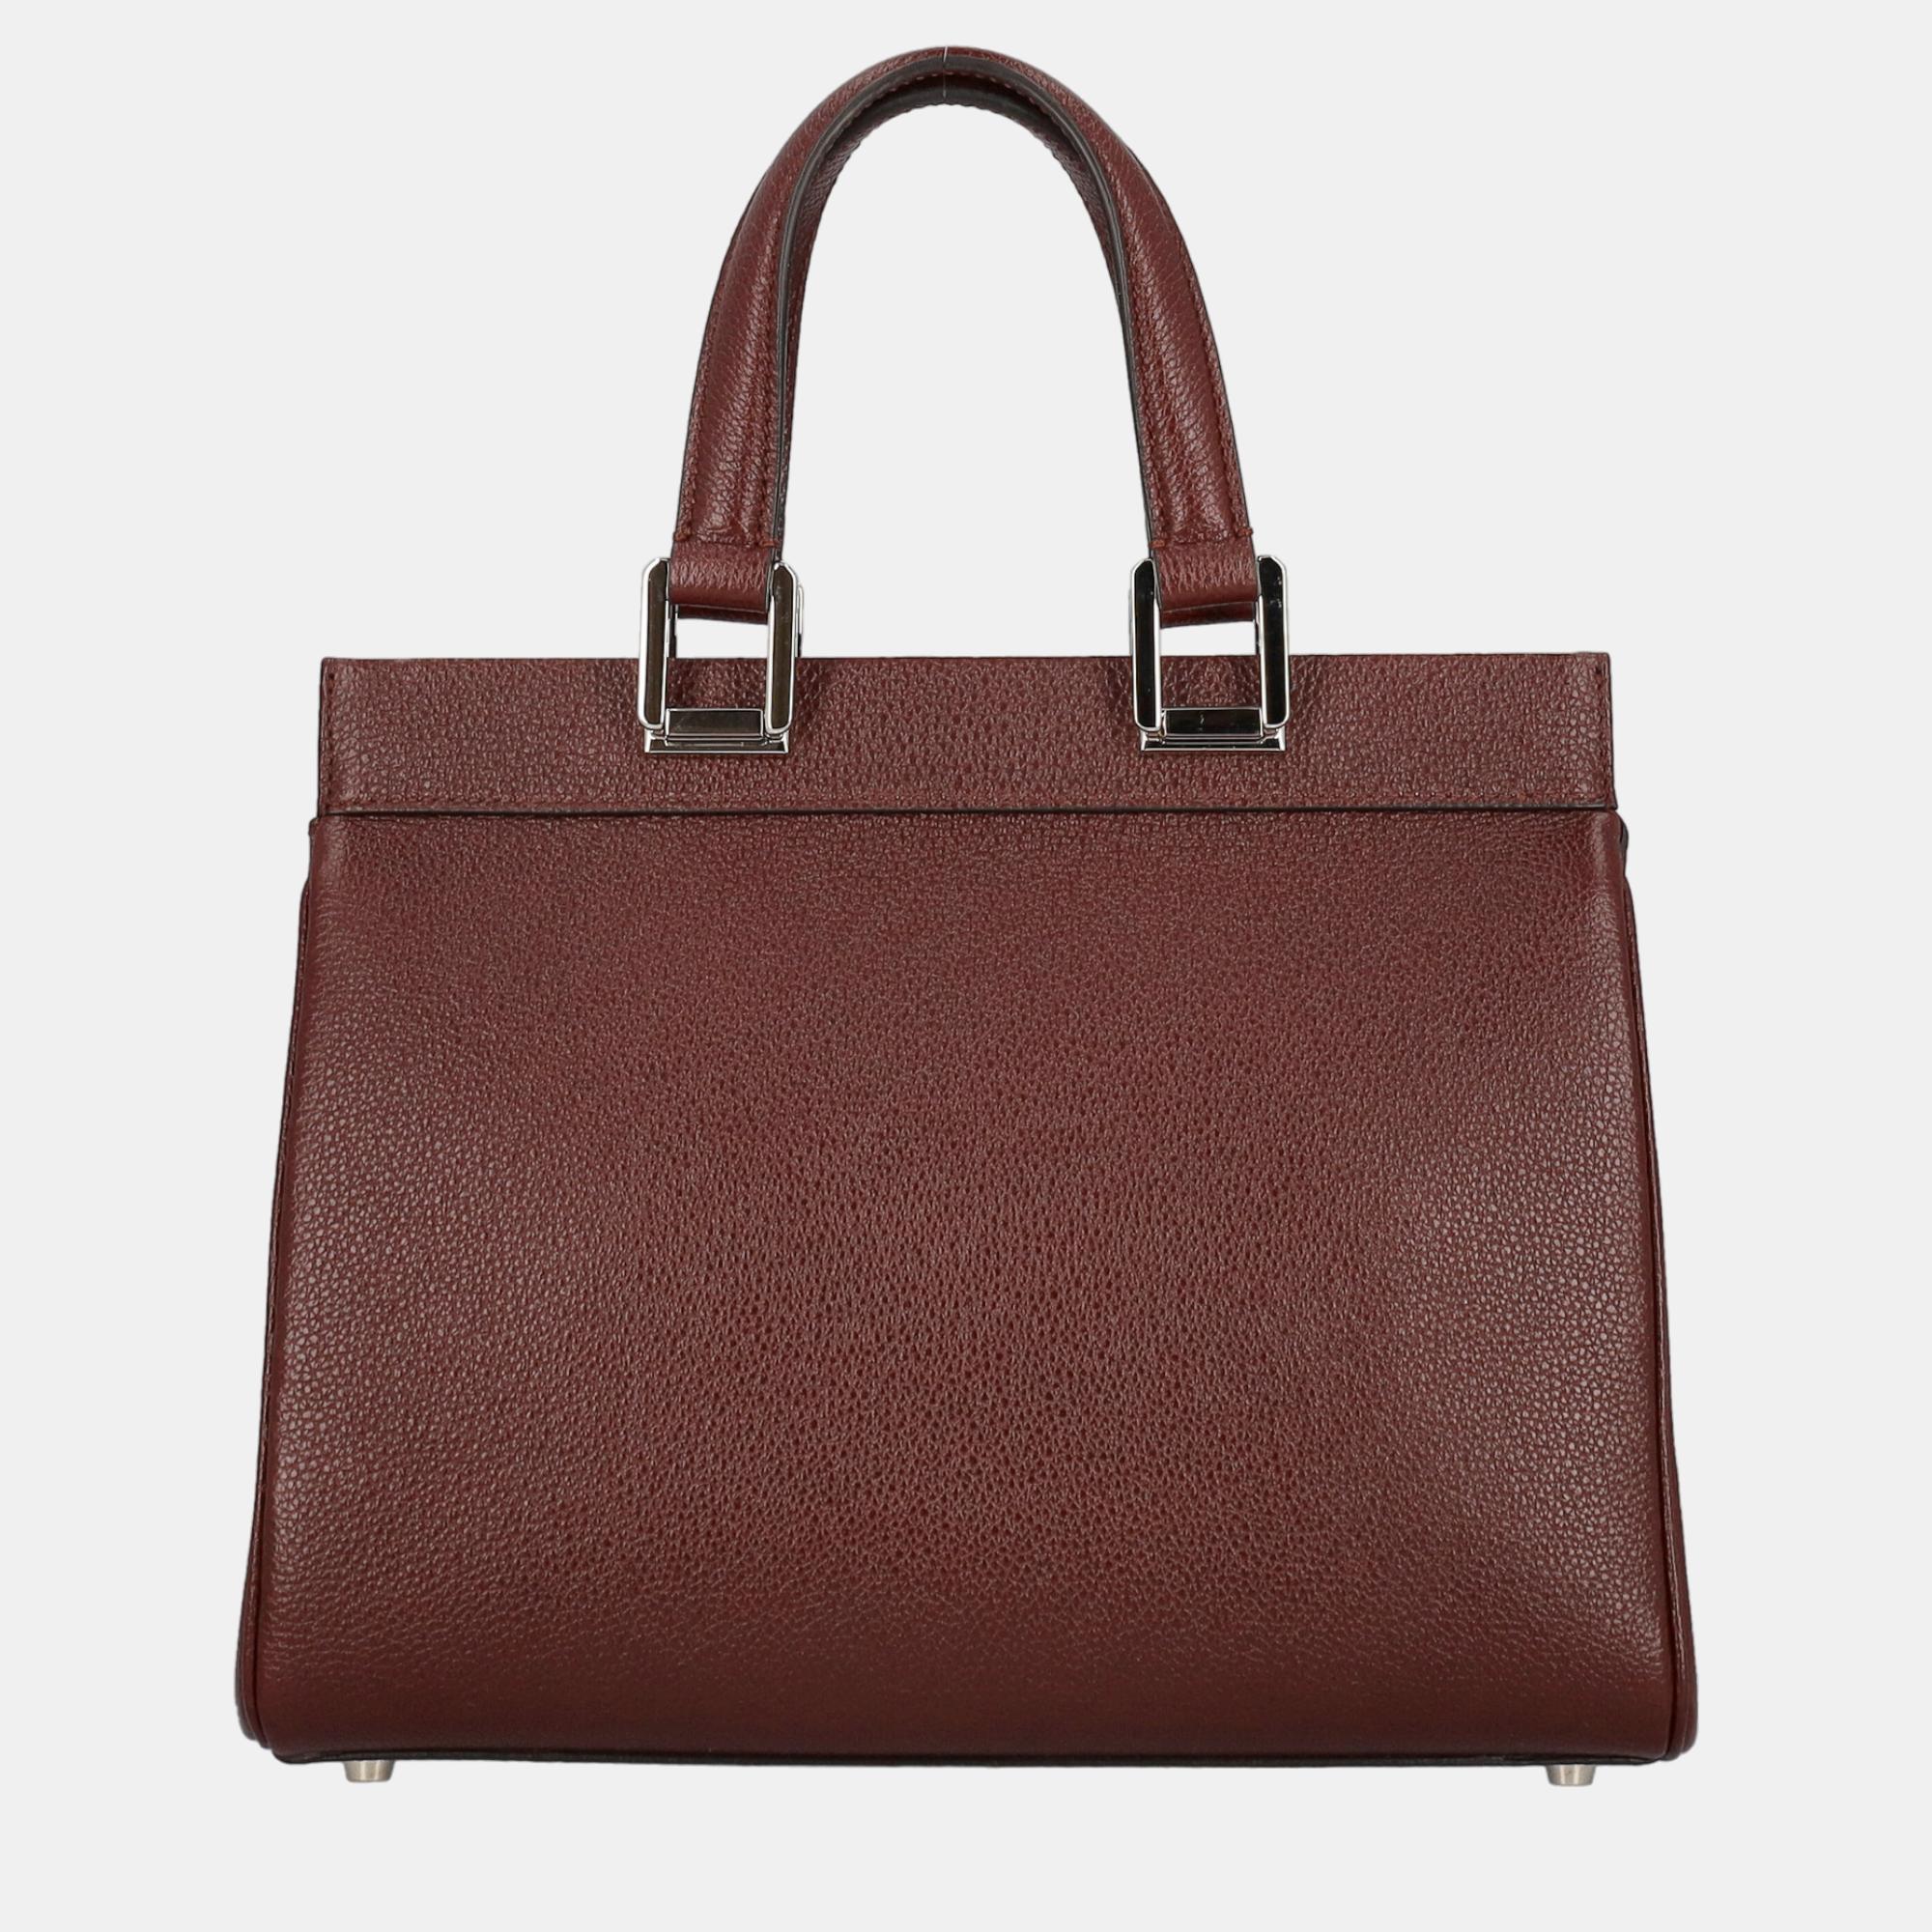 Gucci  Women's Leather Tote Bag - Burgundy - One Size